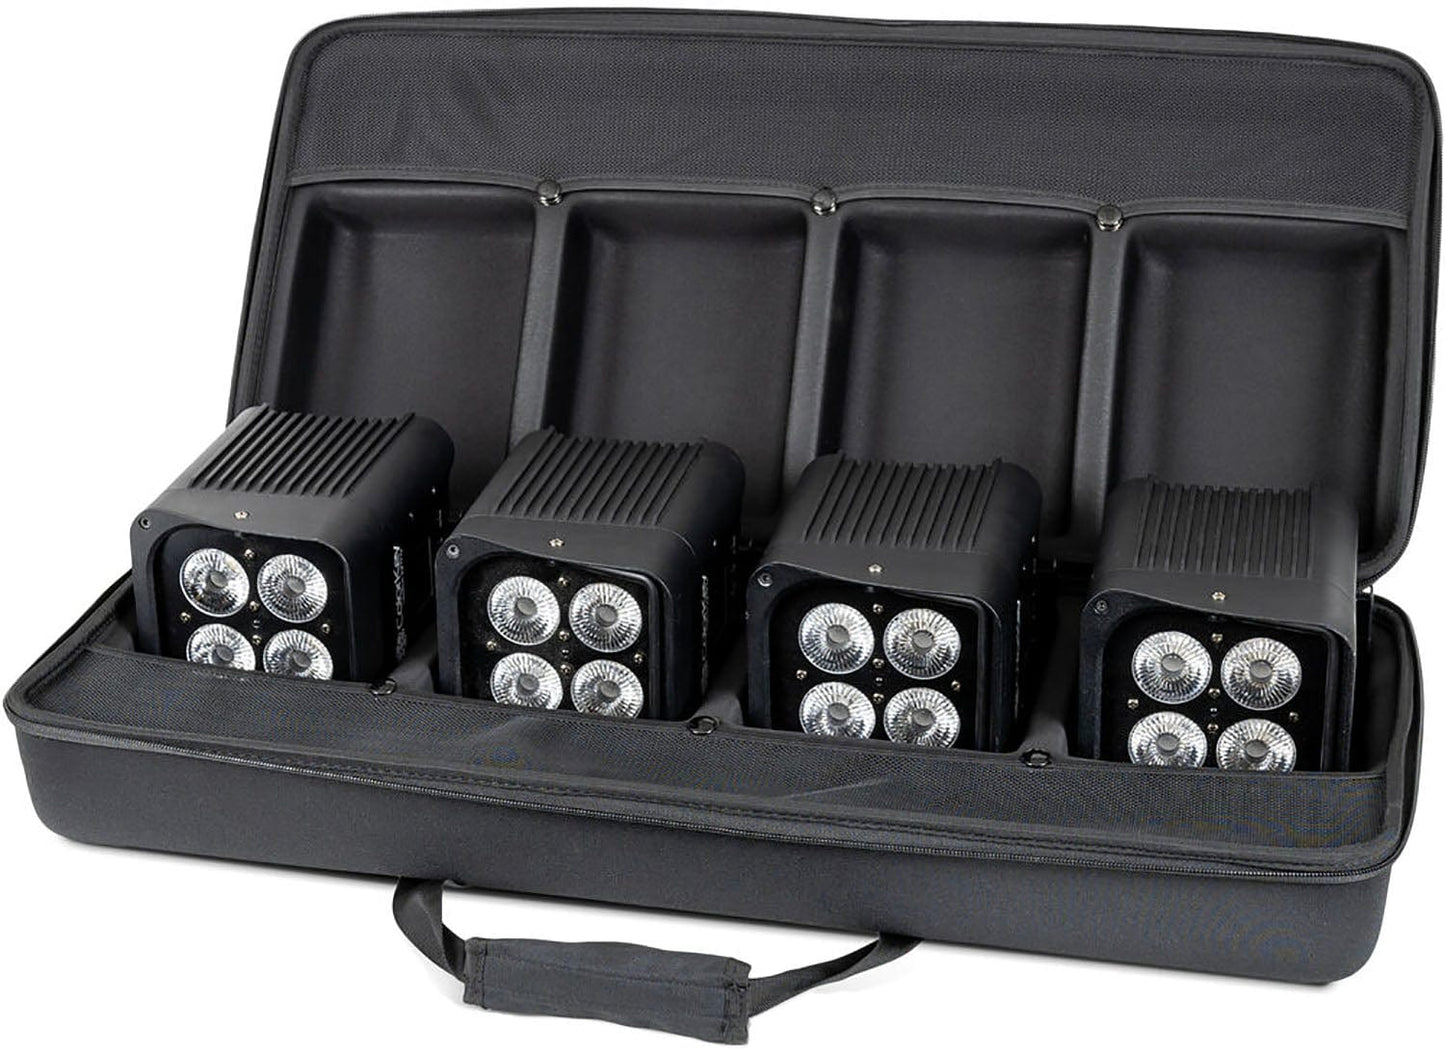 ColorKey CKU-7064 AirPar HEX 4 Bundle - 4-Pack with Hardshell Case - PSSL ProSound and Stage Lighting